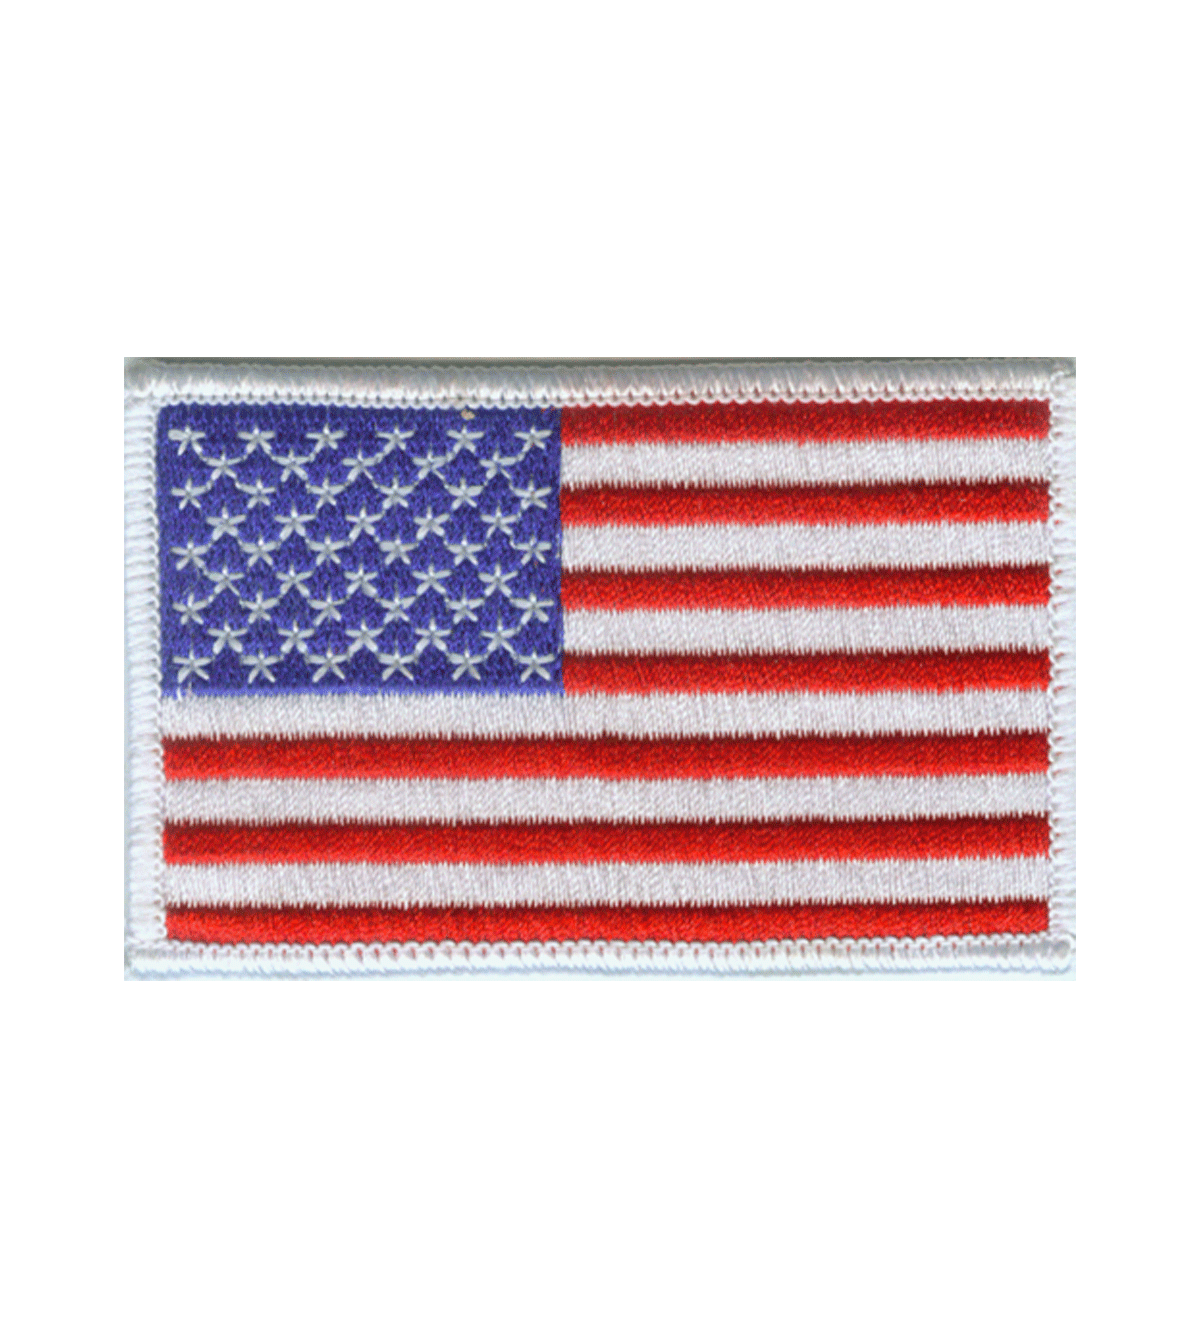 UNITED STATES OF AMERICA FLAG PATCH: Waving White Border